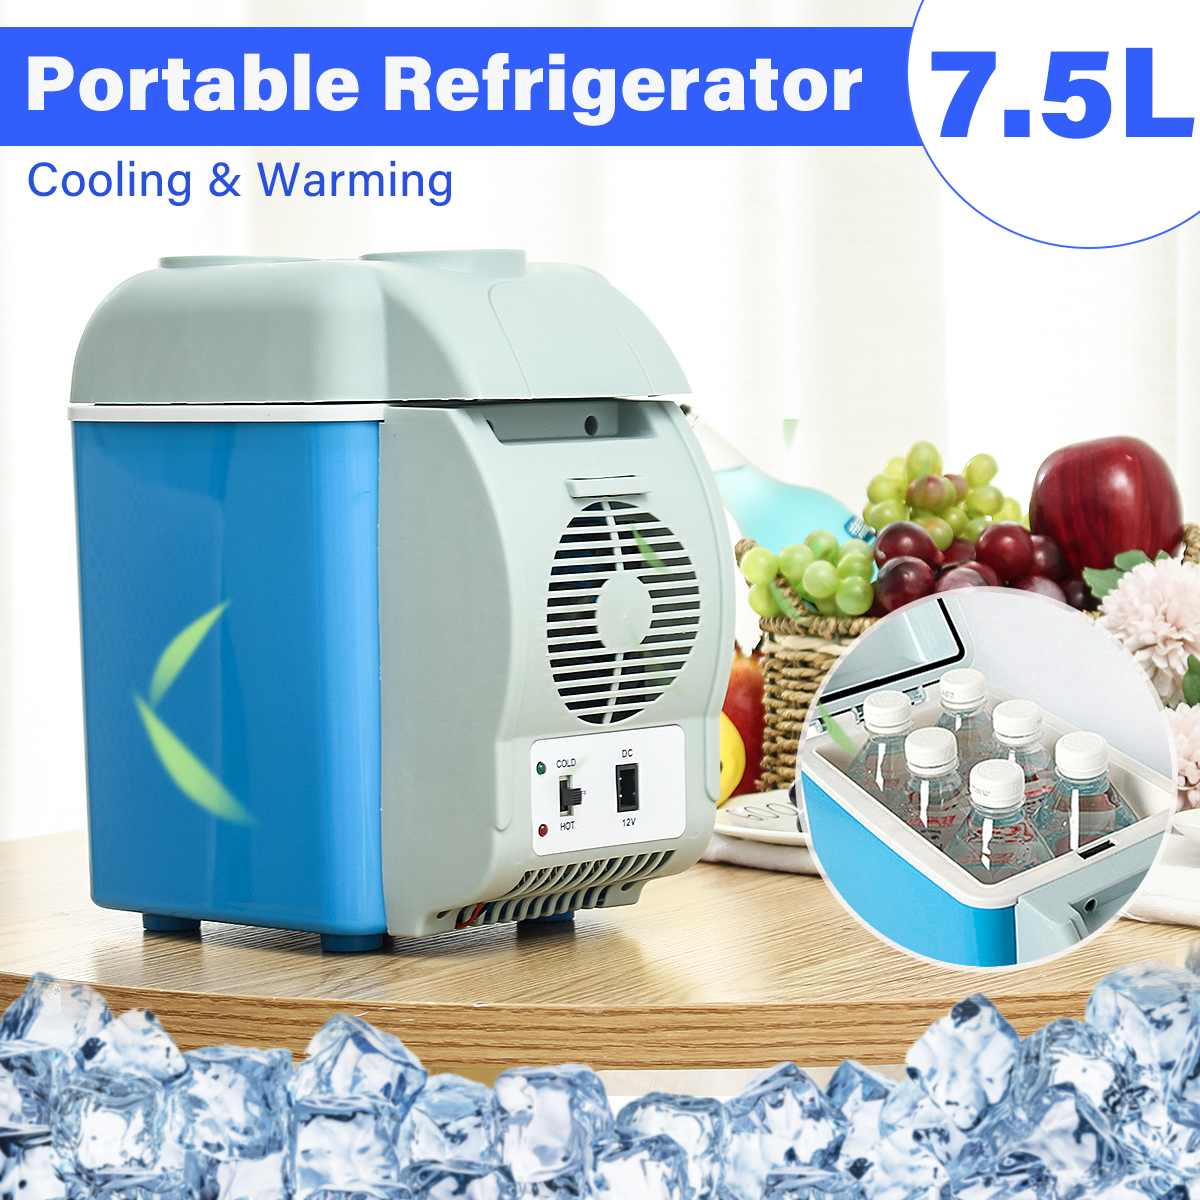 12V-75L-Portable-Vehicle-Refrigerator-Dual-use-Heating--Cooling-Freezer-For-Outdoor-Camping-Travelli-1748753-2